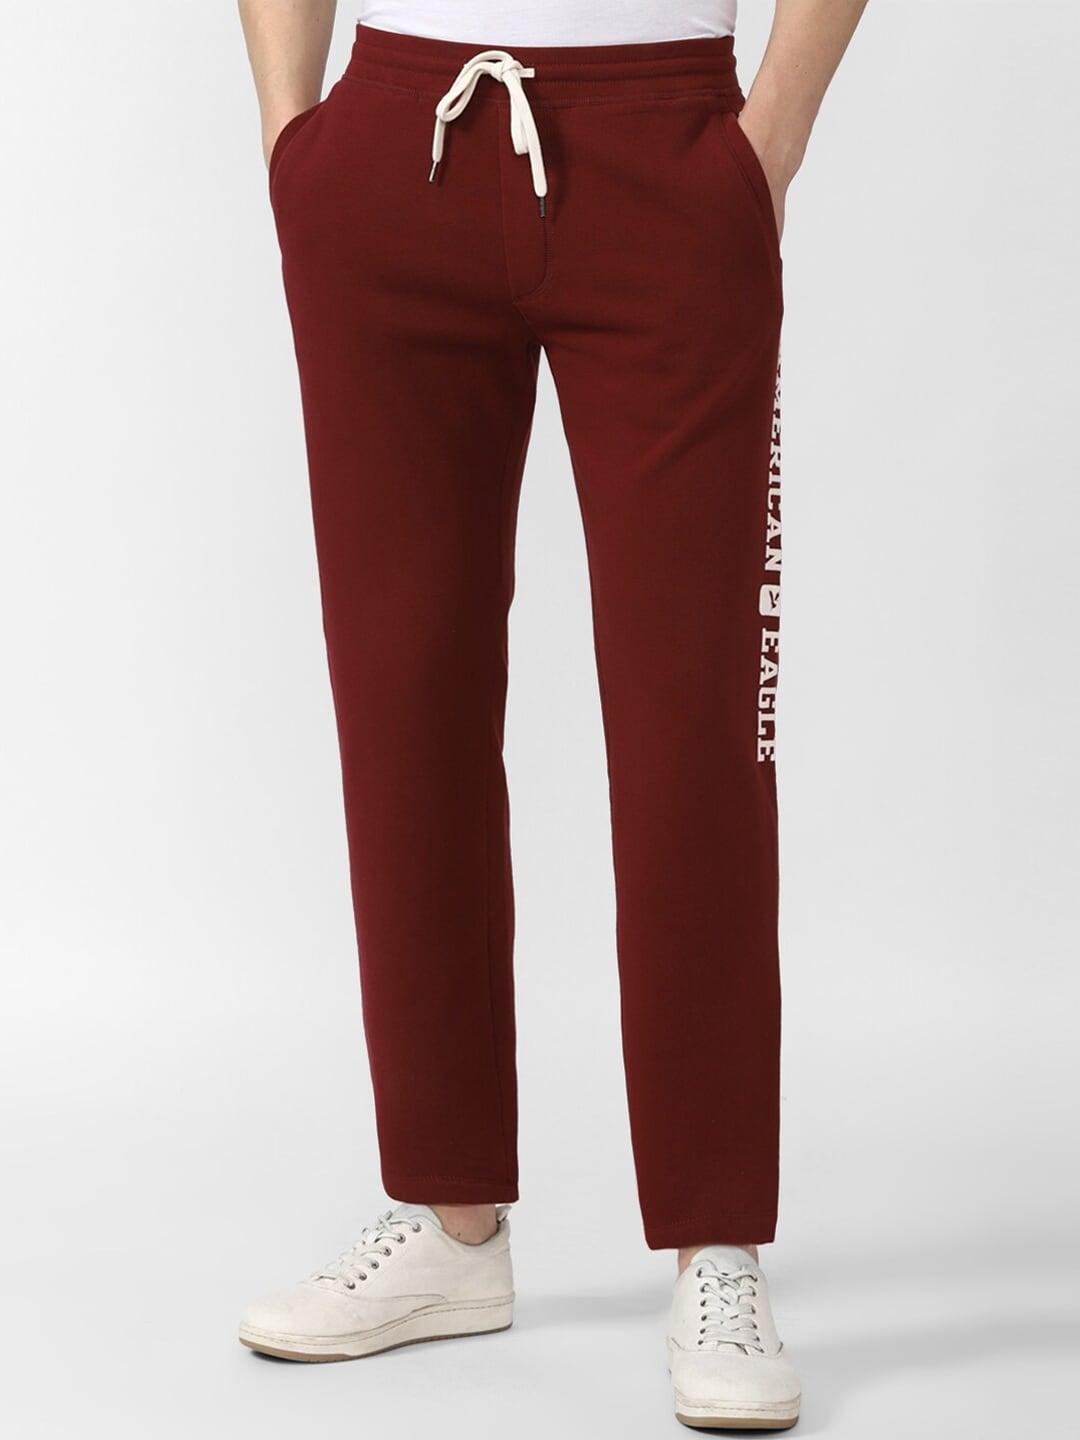 american-eagle-outfitters-men-burgundy-typography-printed-track-pants